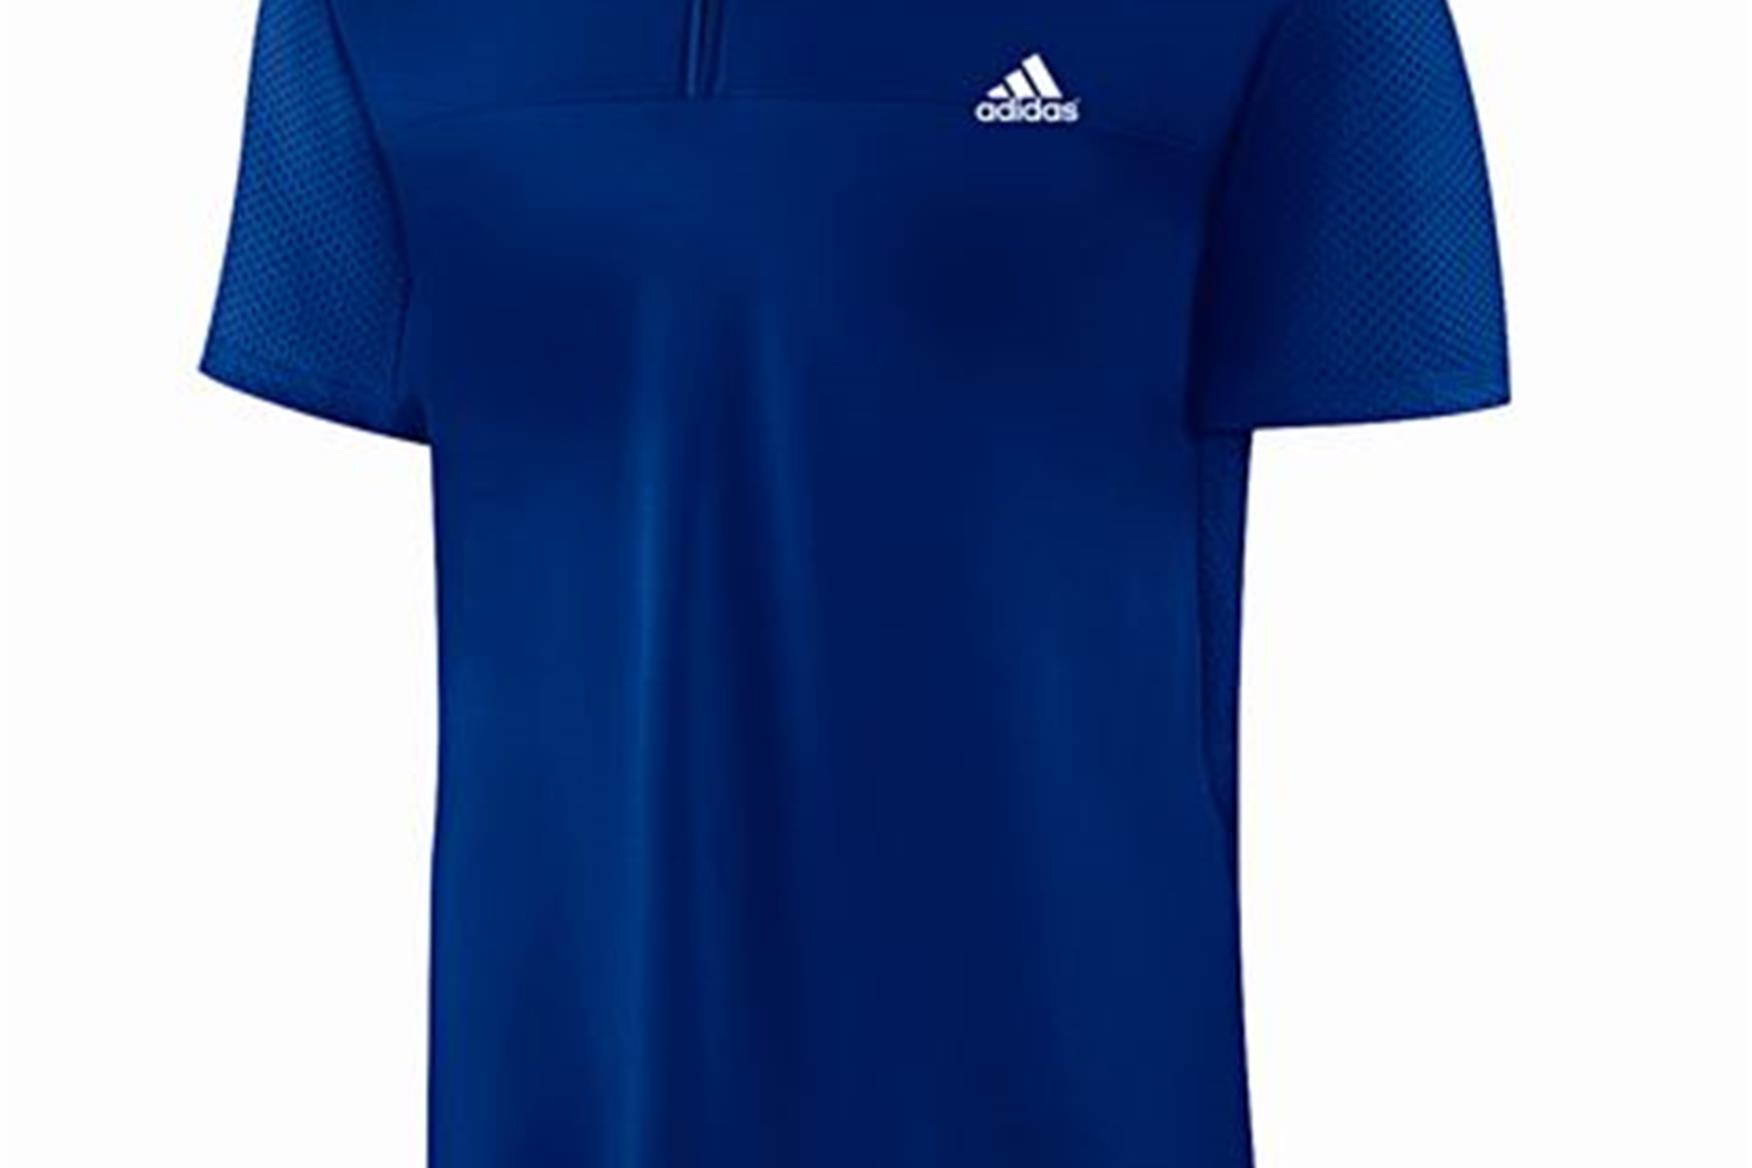 adidas climacool polo review